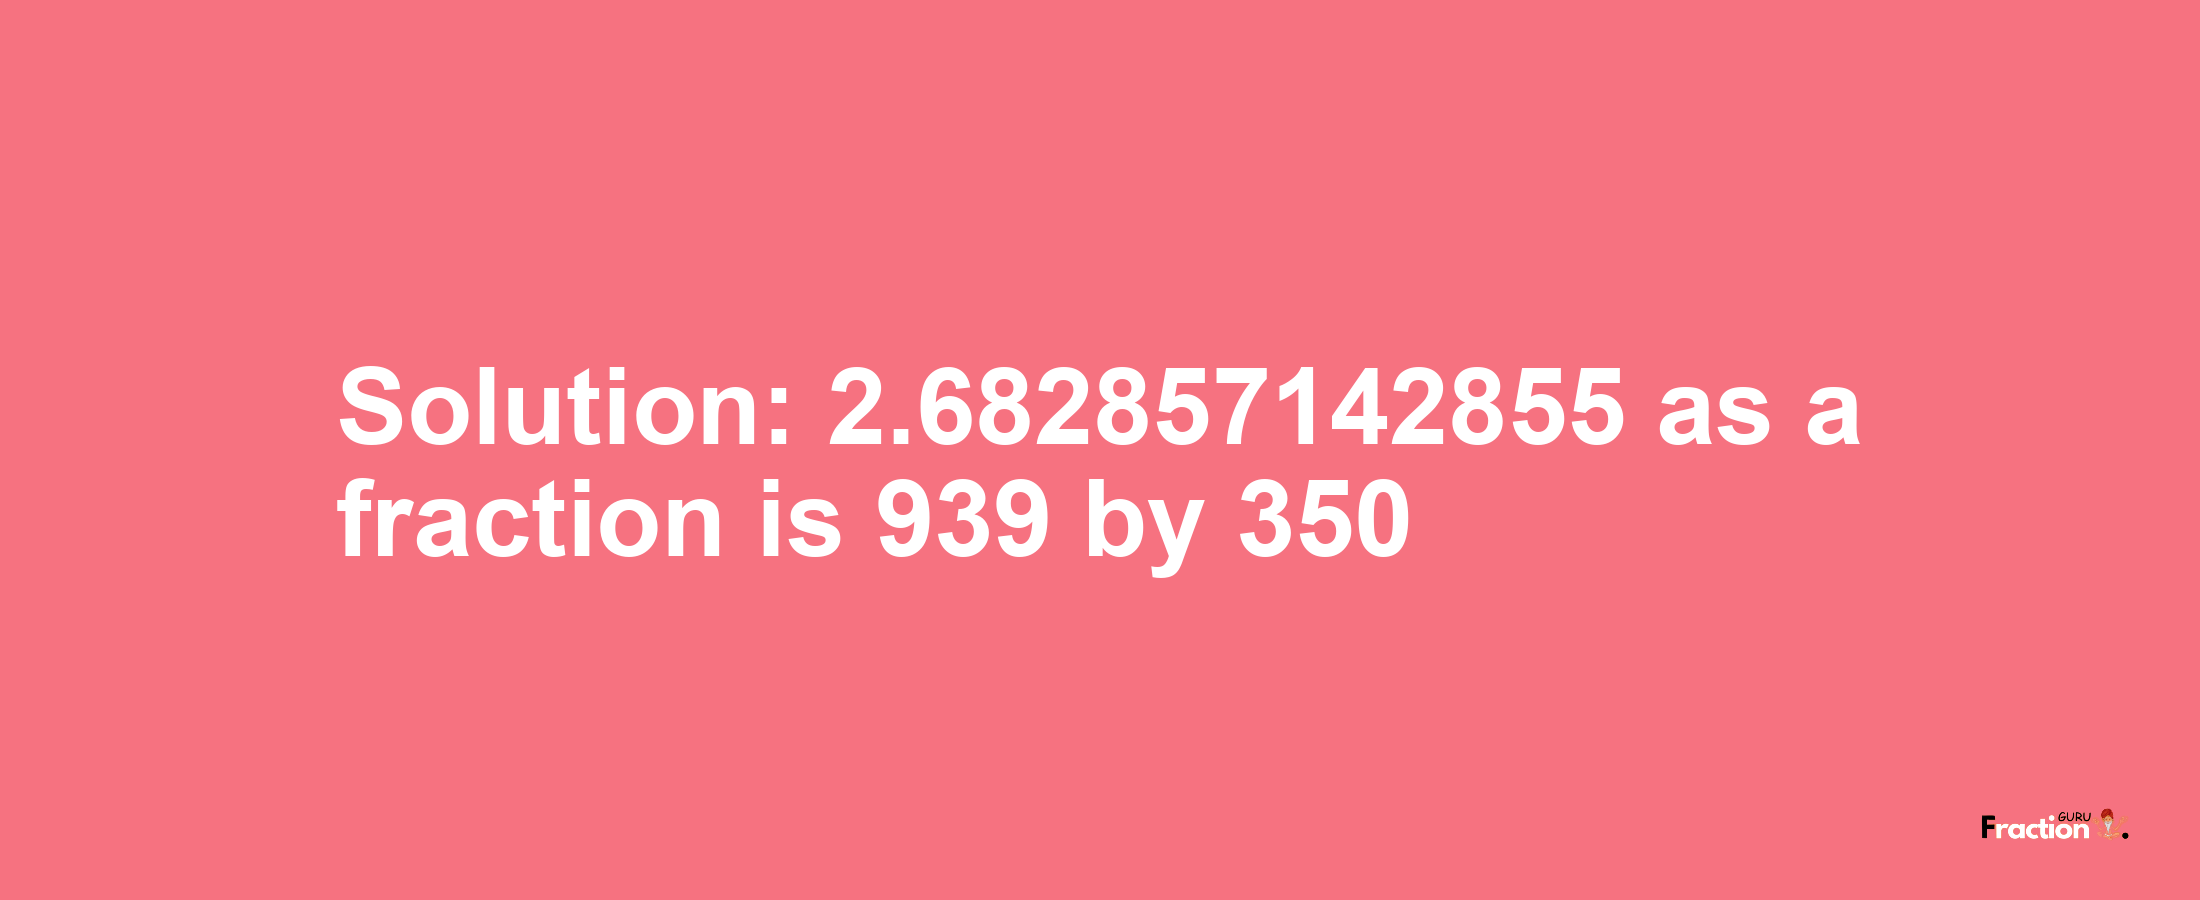 Solution:2.682857142855 as a fraction is 939/350